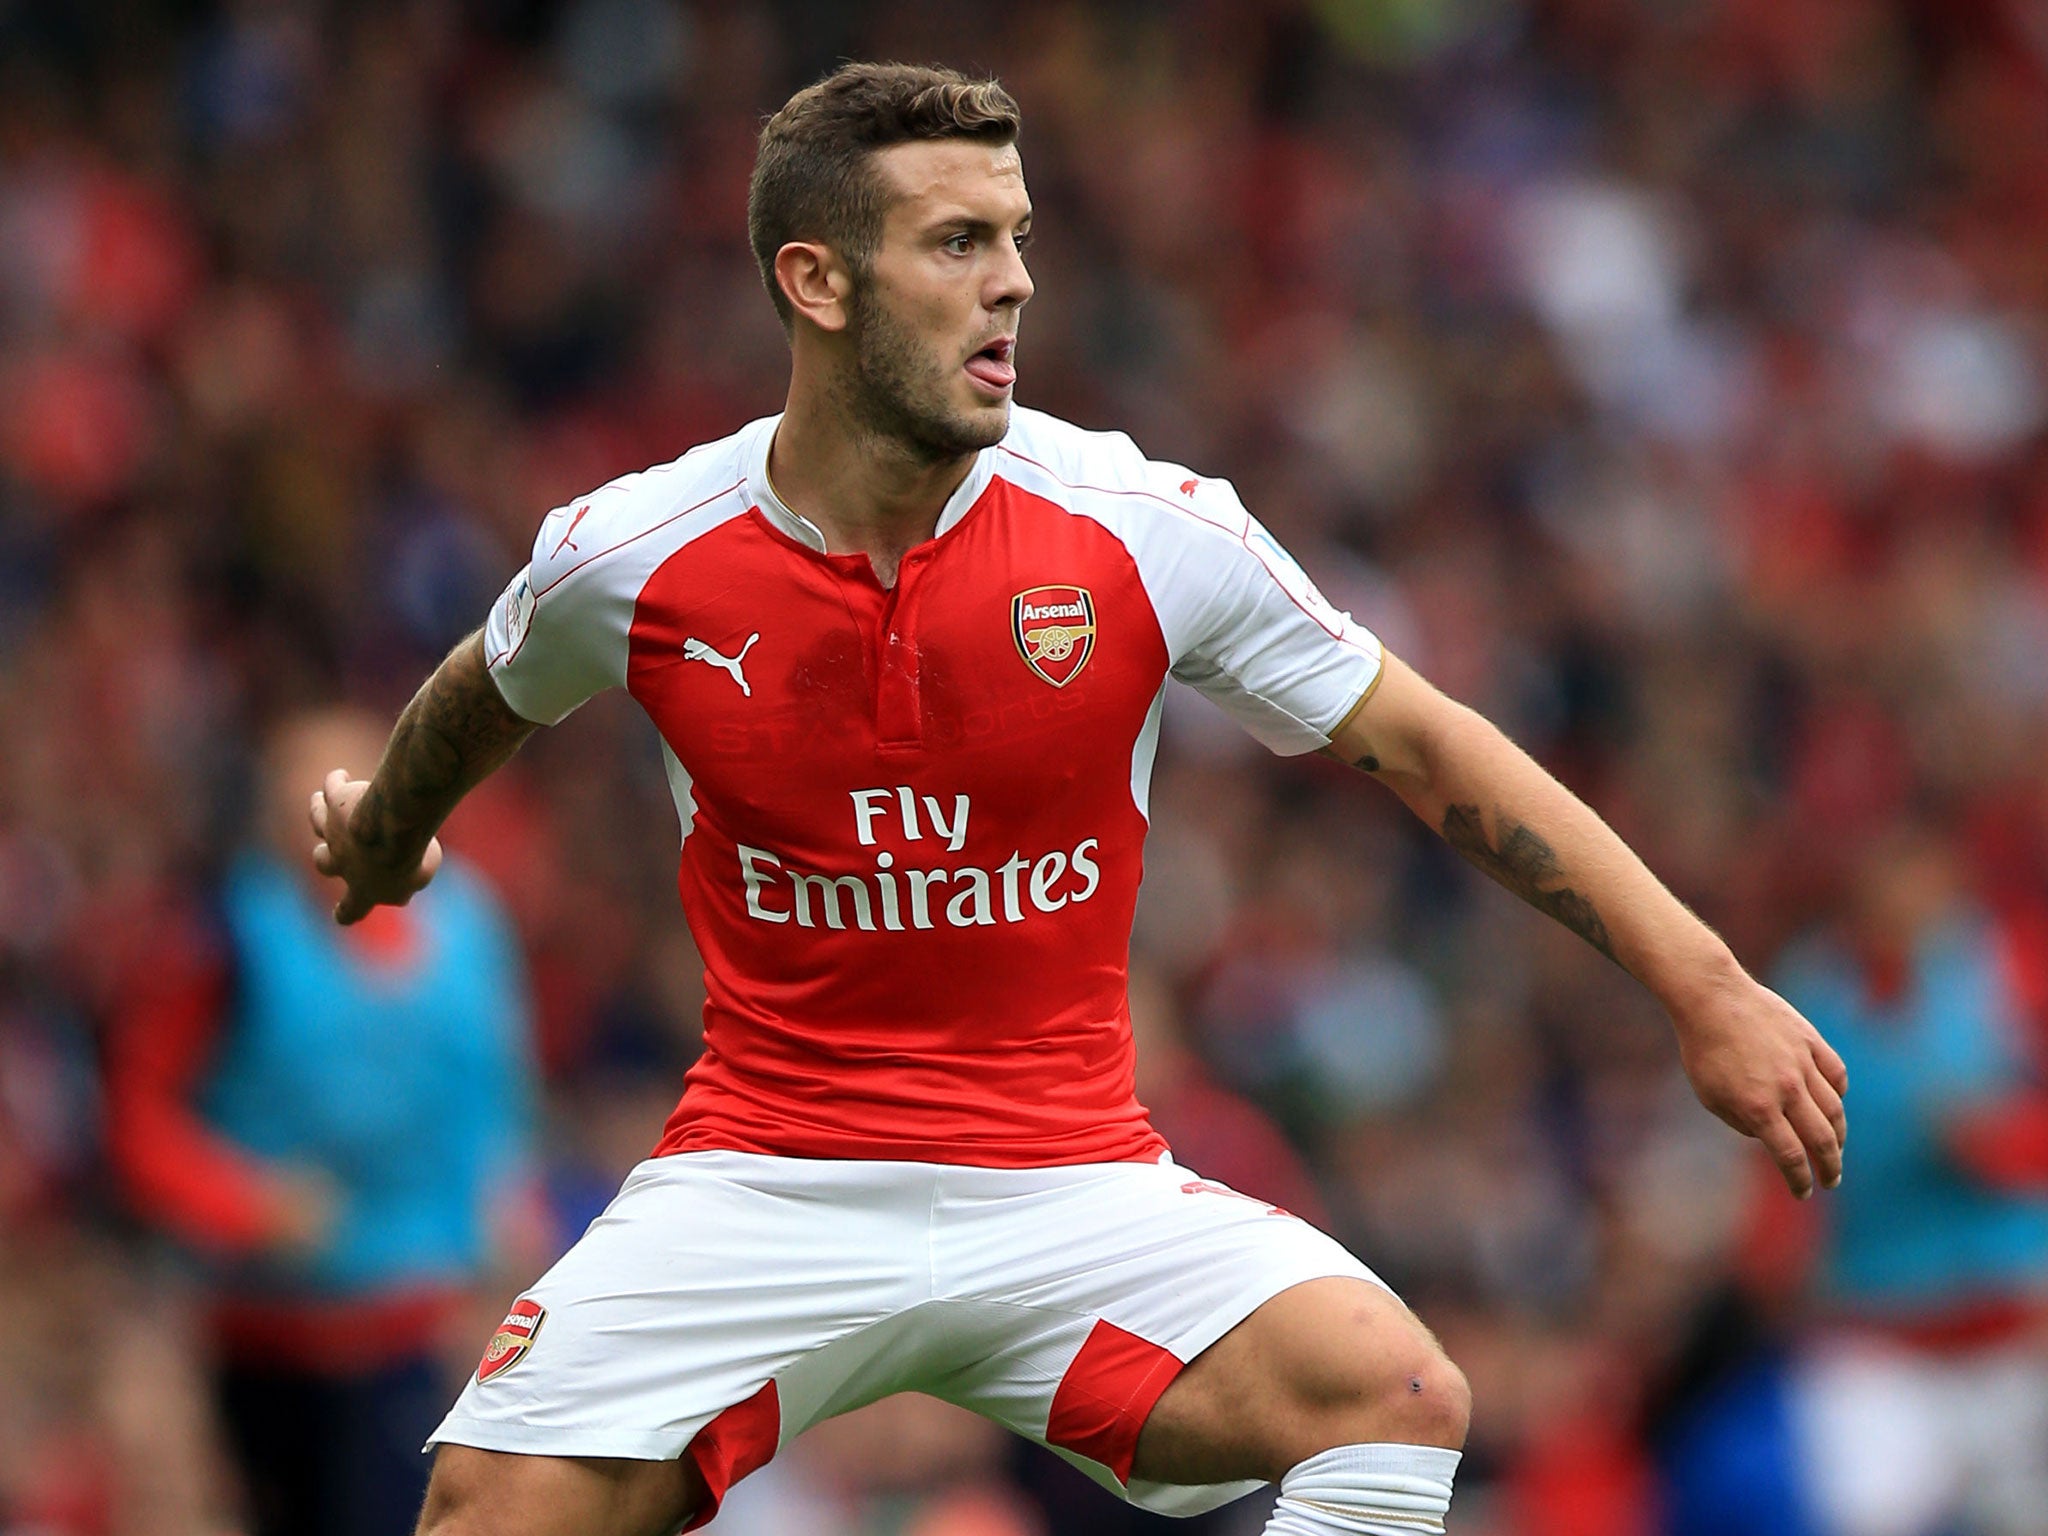 Jack Wilshere was injured on Saturday in training